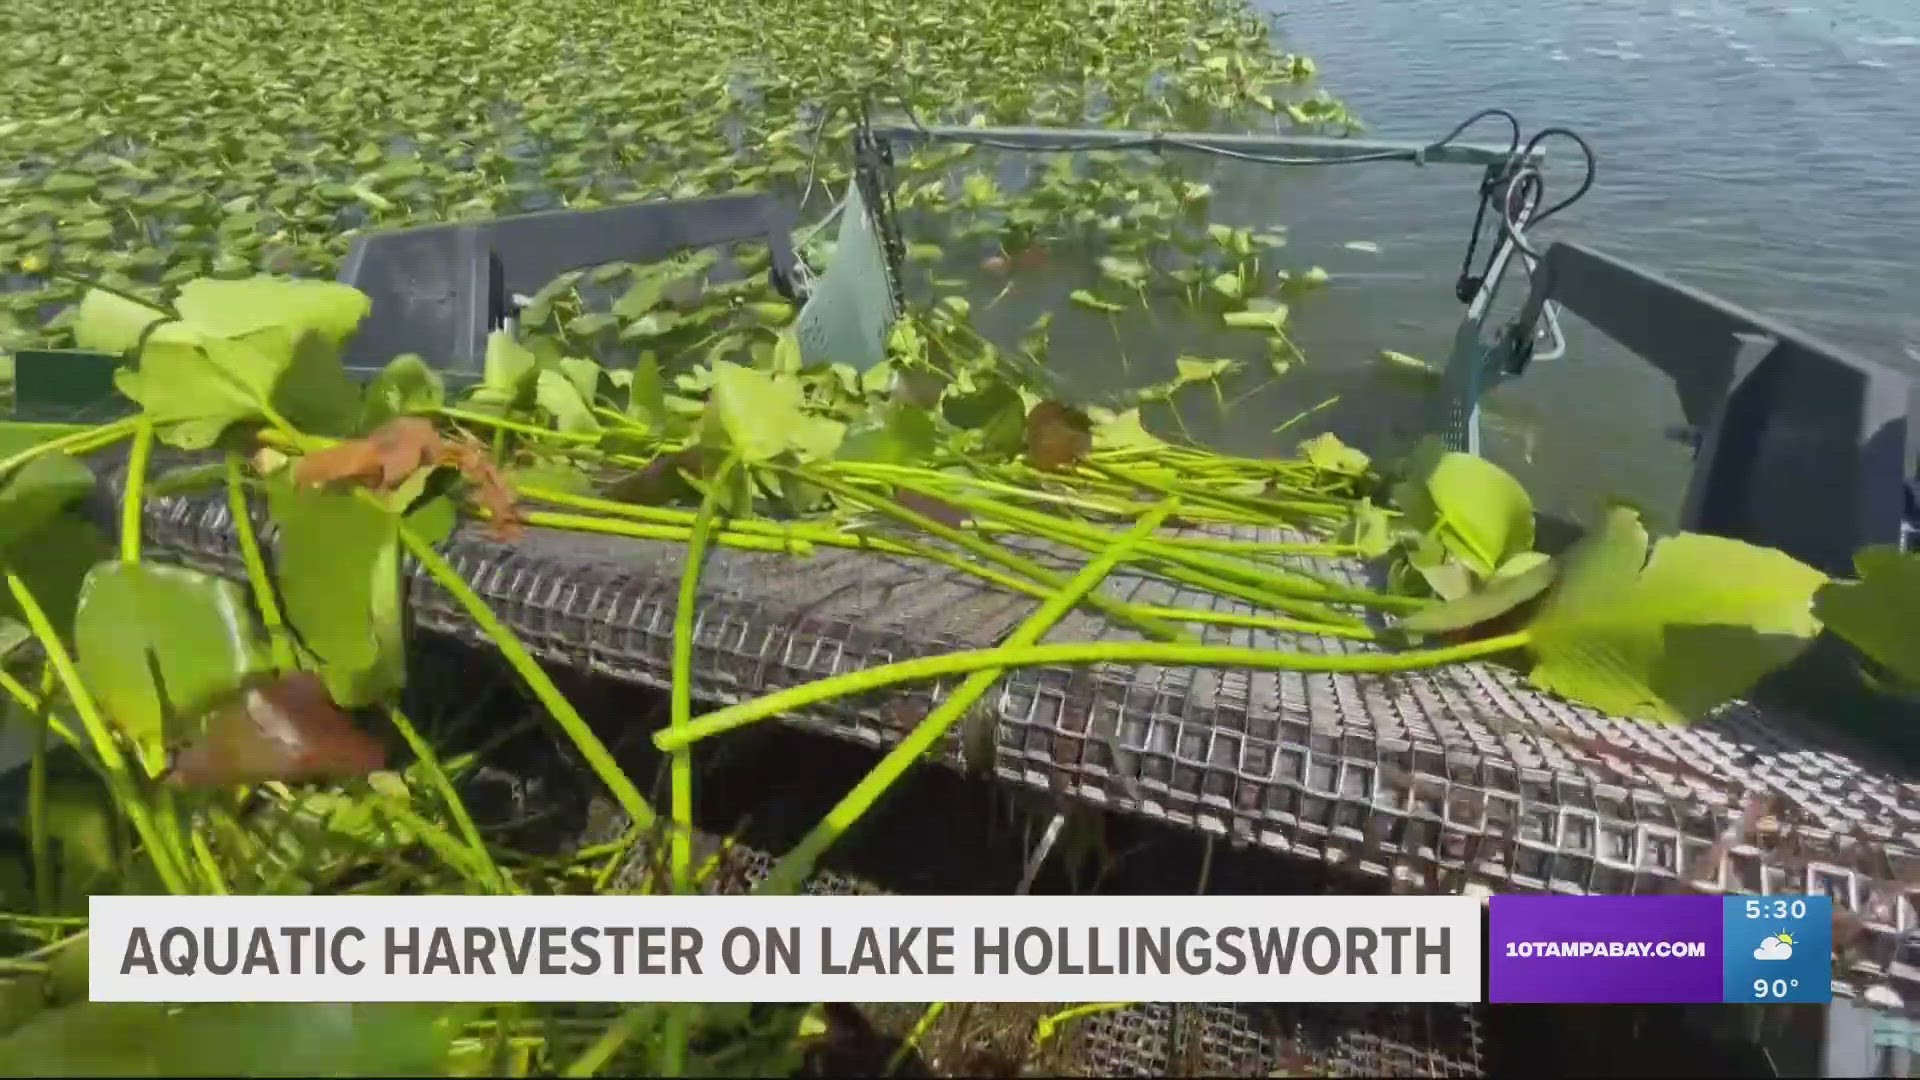 This is the first time the city has deployed the aquatic harvester on Lake Hollingsworth.